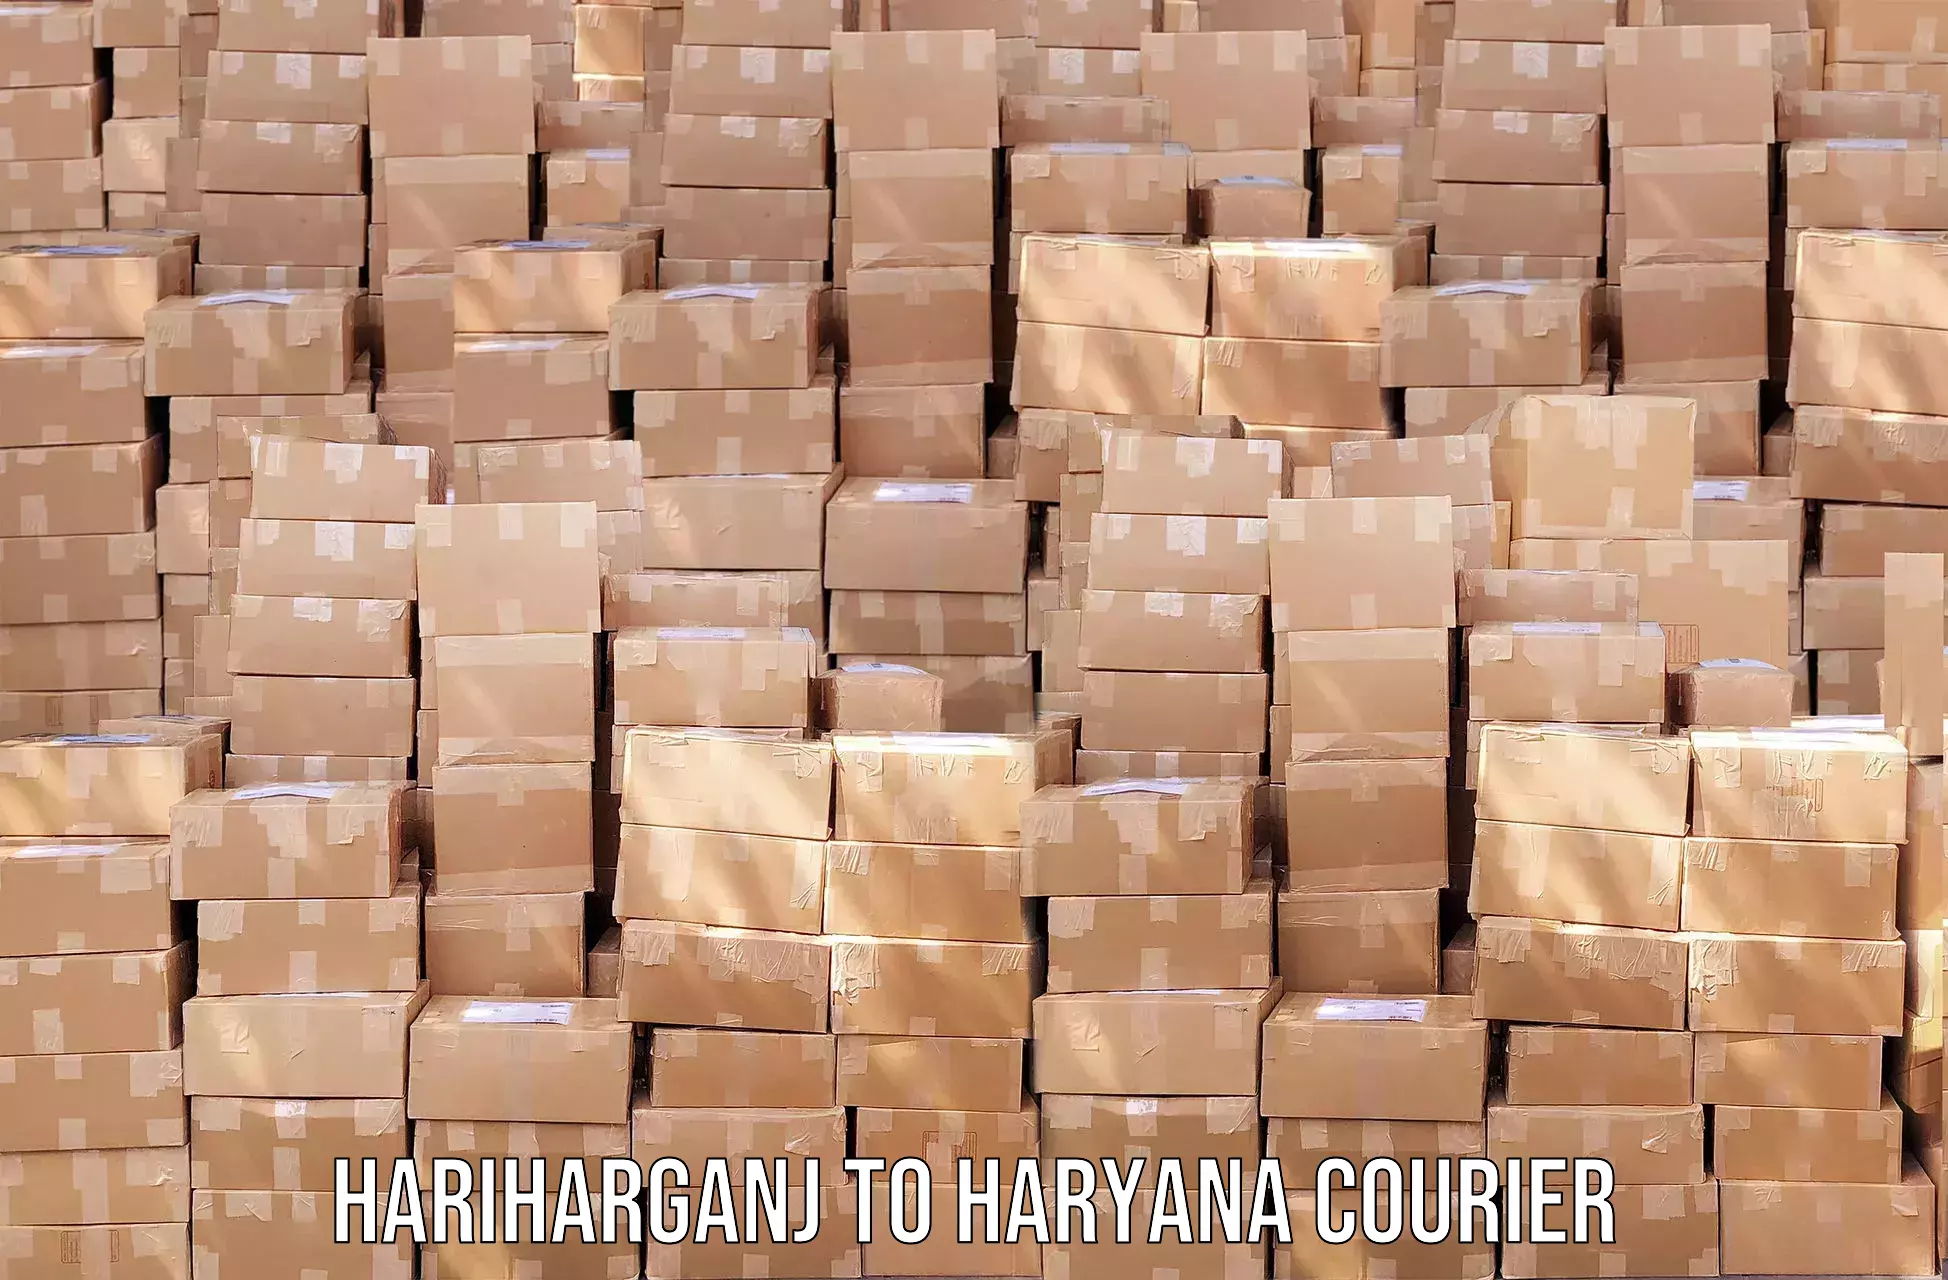 Courier service comparison in Hariharganj to Bhuna